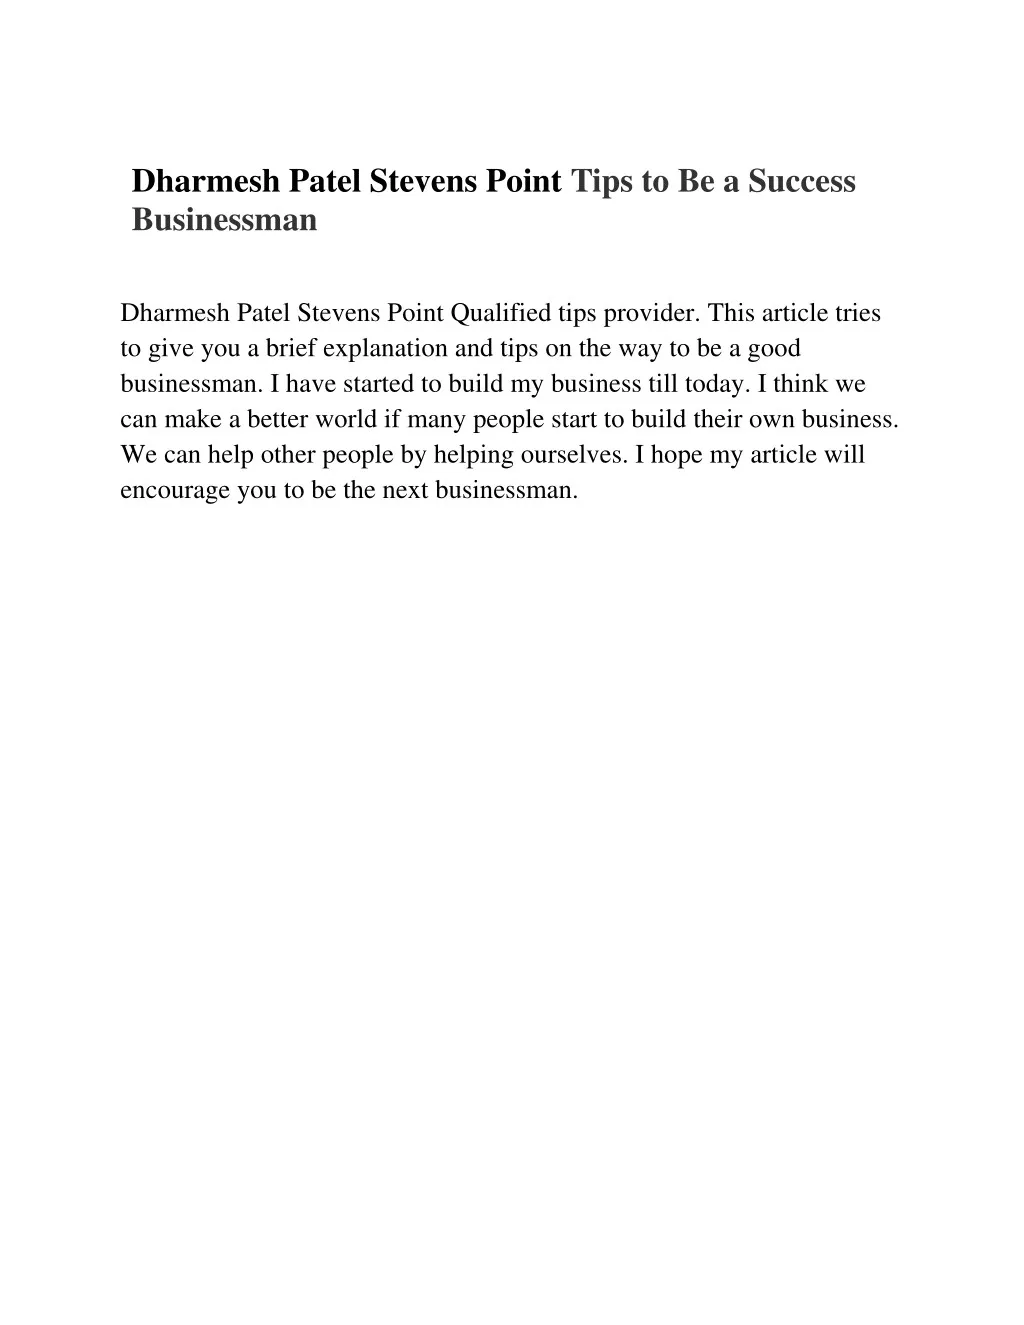 dharmesh patel stevens point tips to be a success